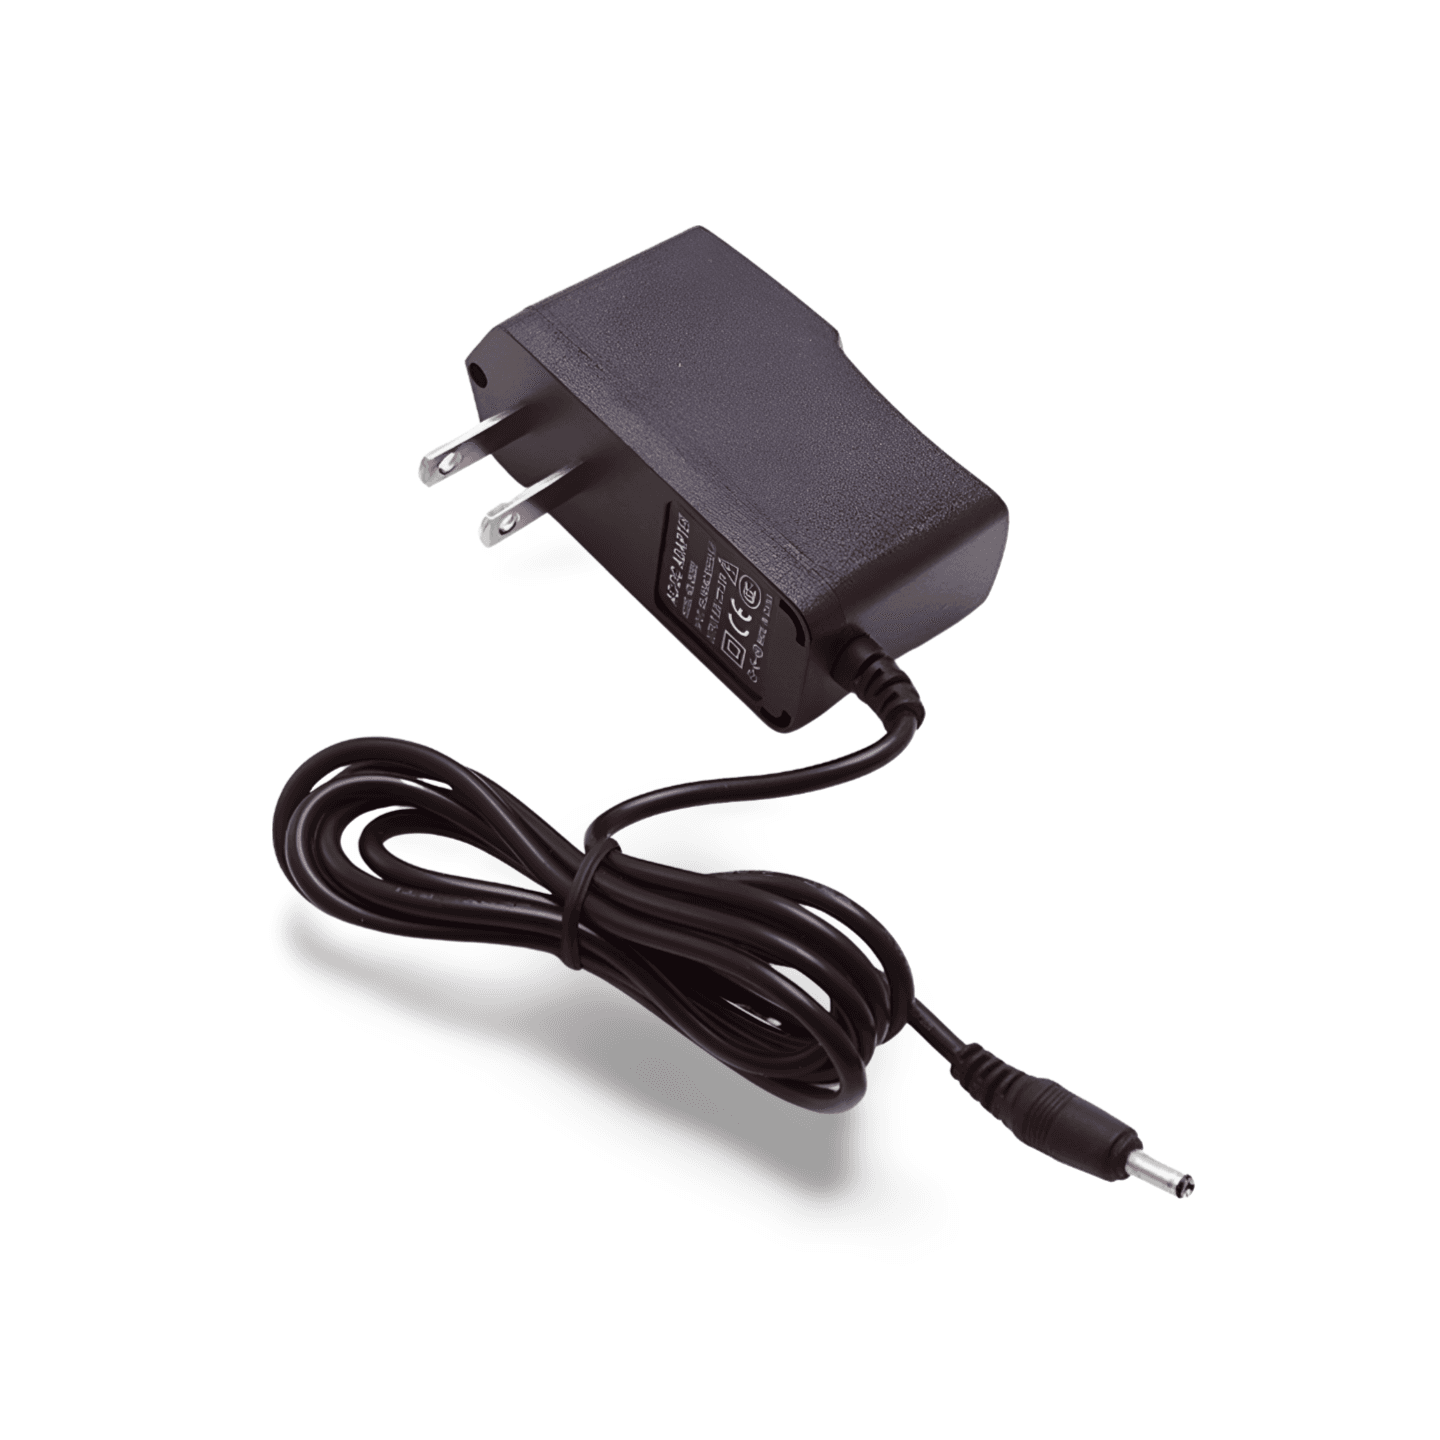 AC Power Adapter for USB Active Repeater Cable 5 Volts DC 2 Amps black